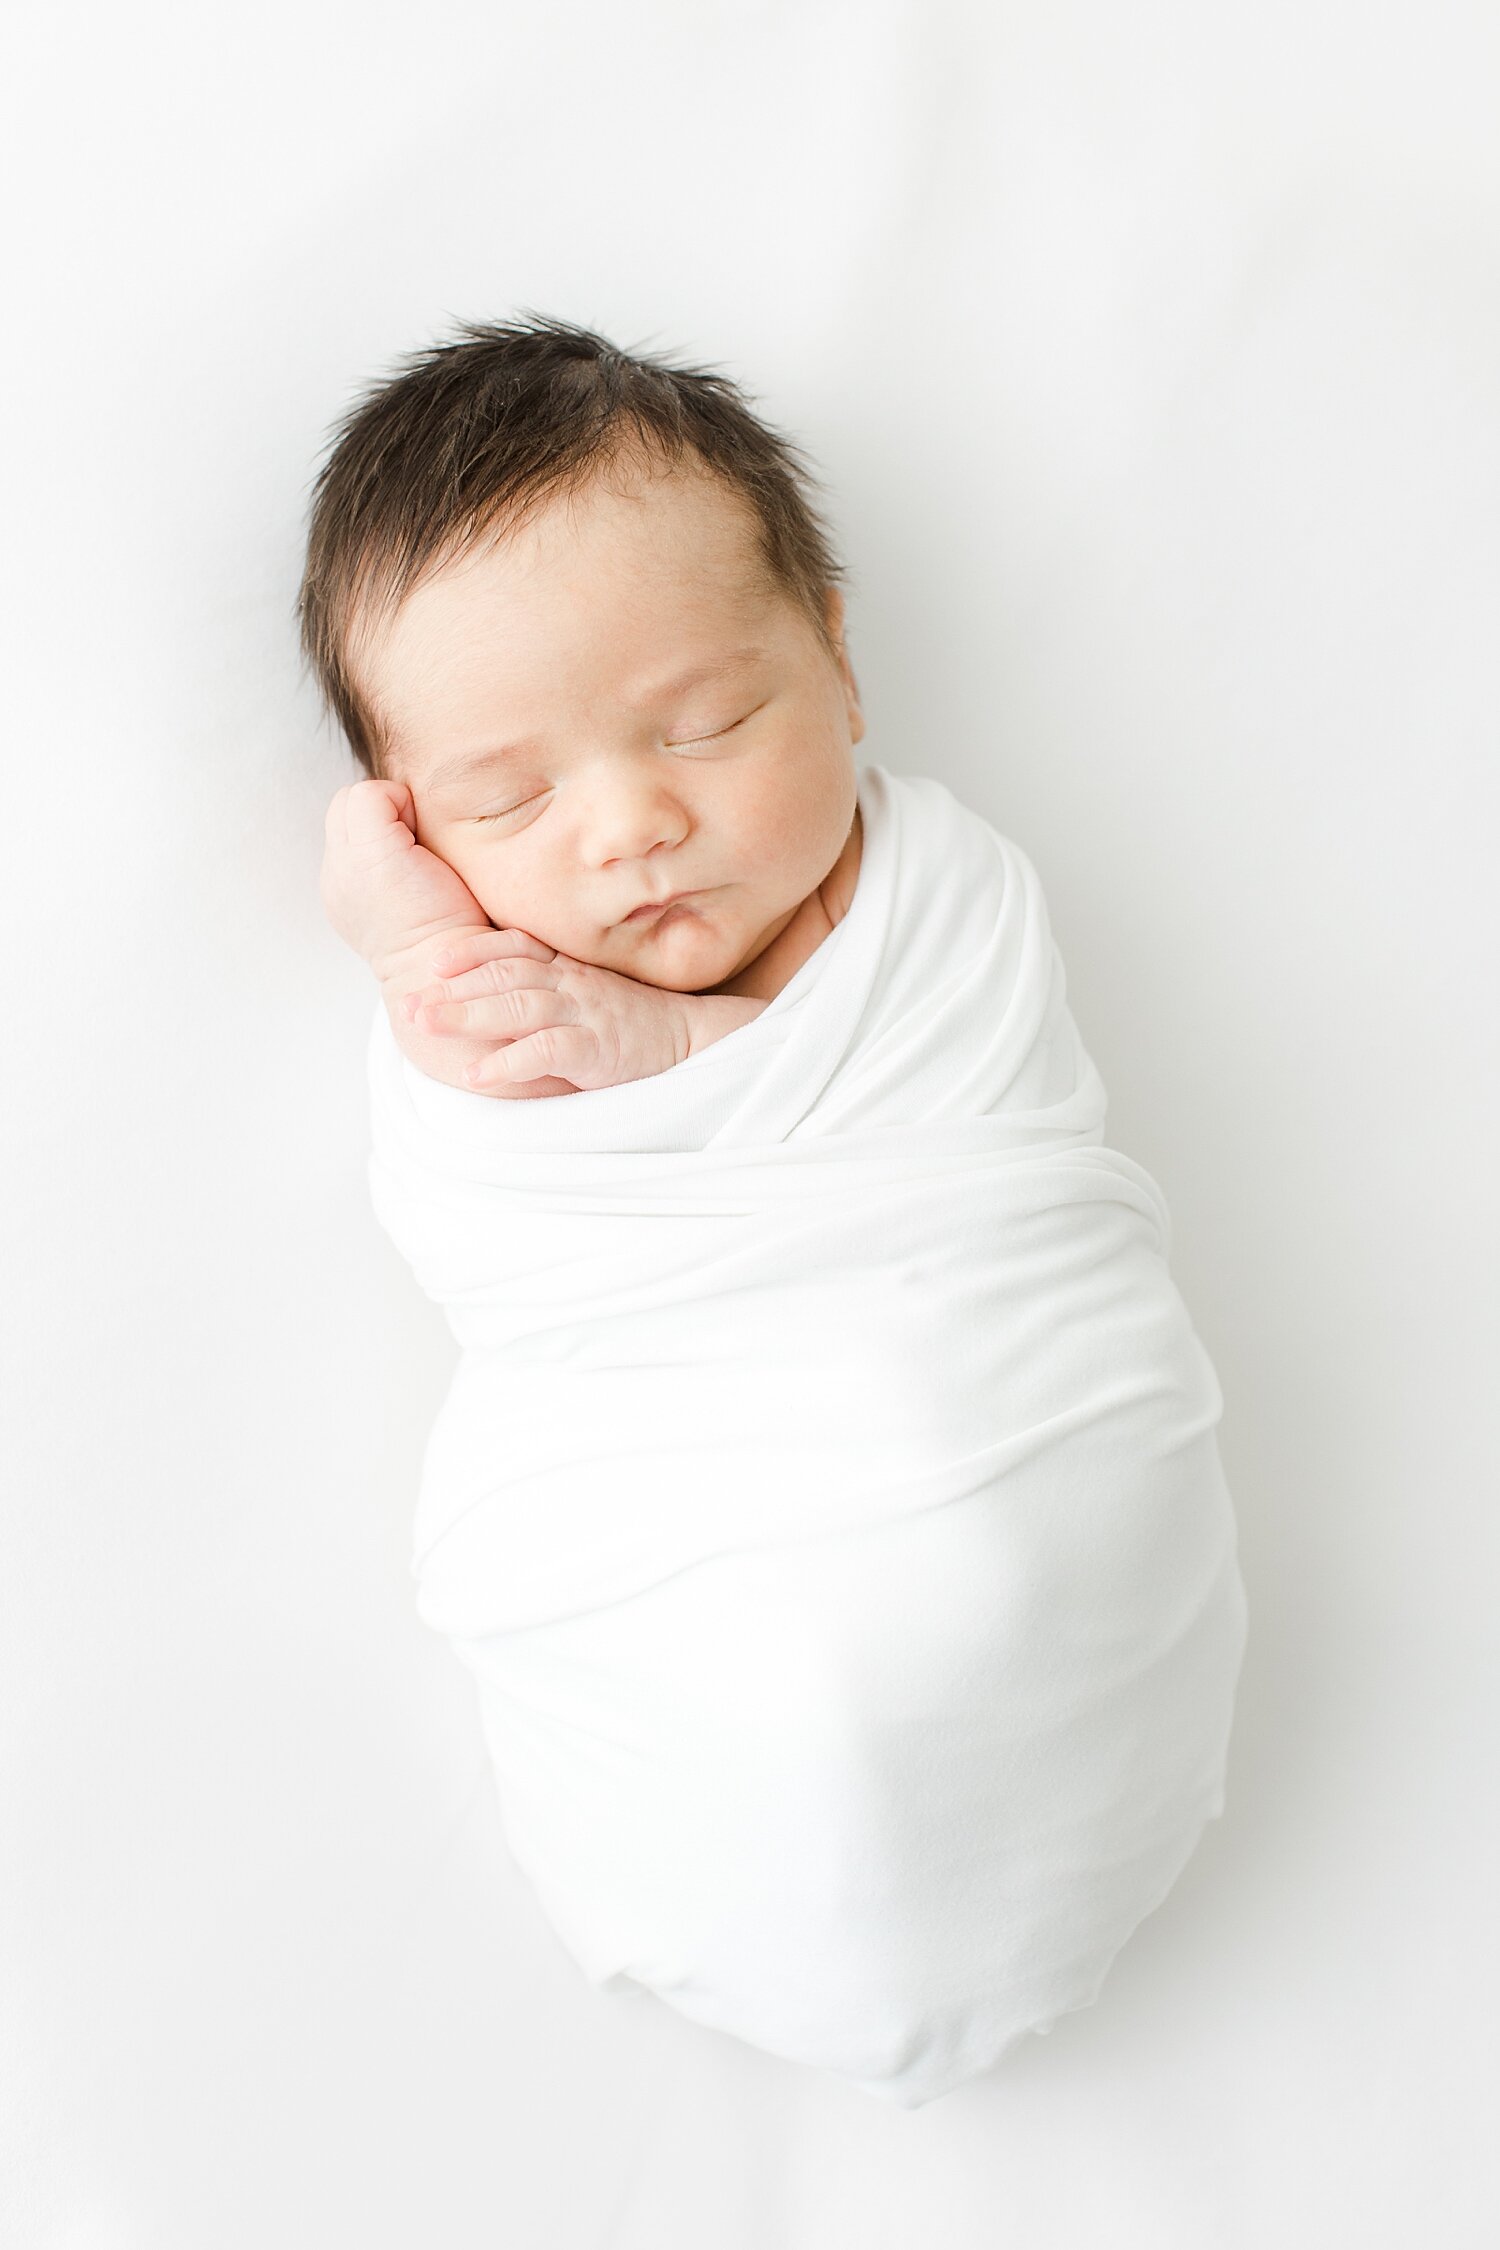 Baby boy swaddled in white with his hands up by his face. Photo by Fairfield County, CT Newborn Photographer, Kristin Wood Photography.